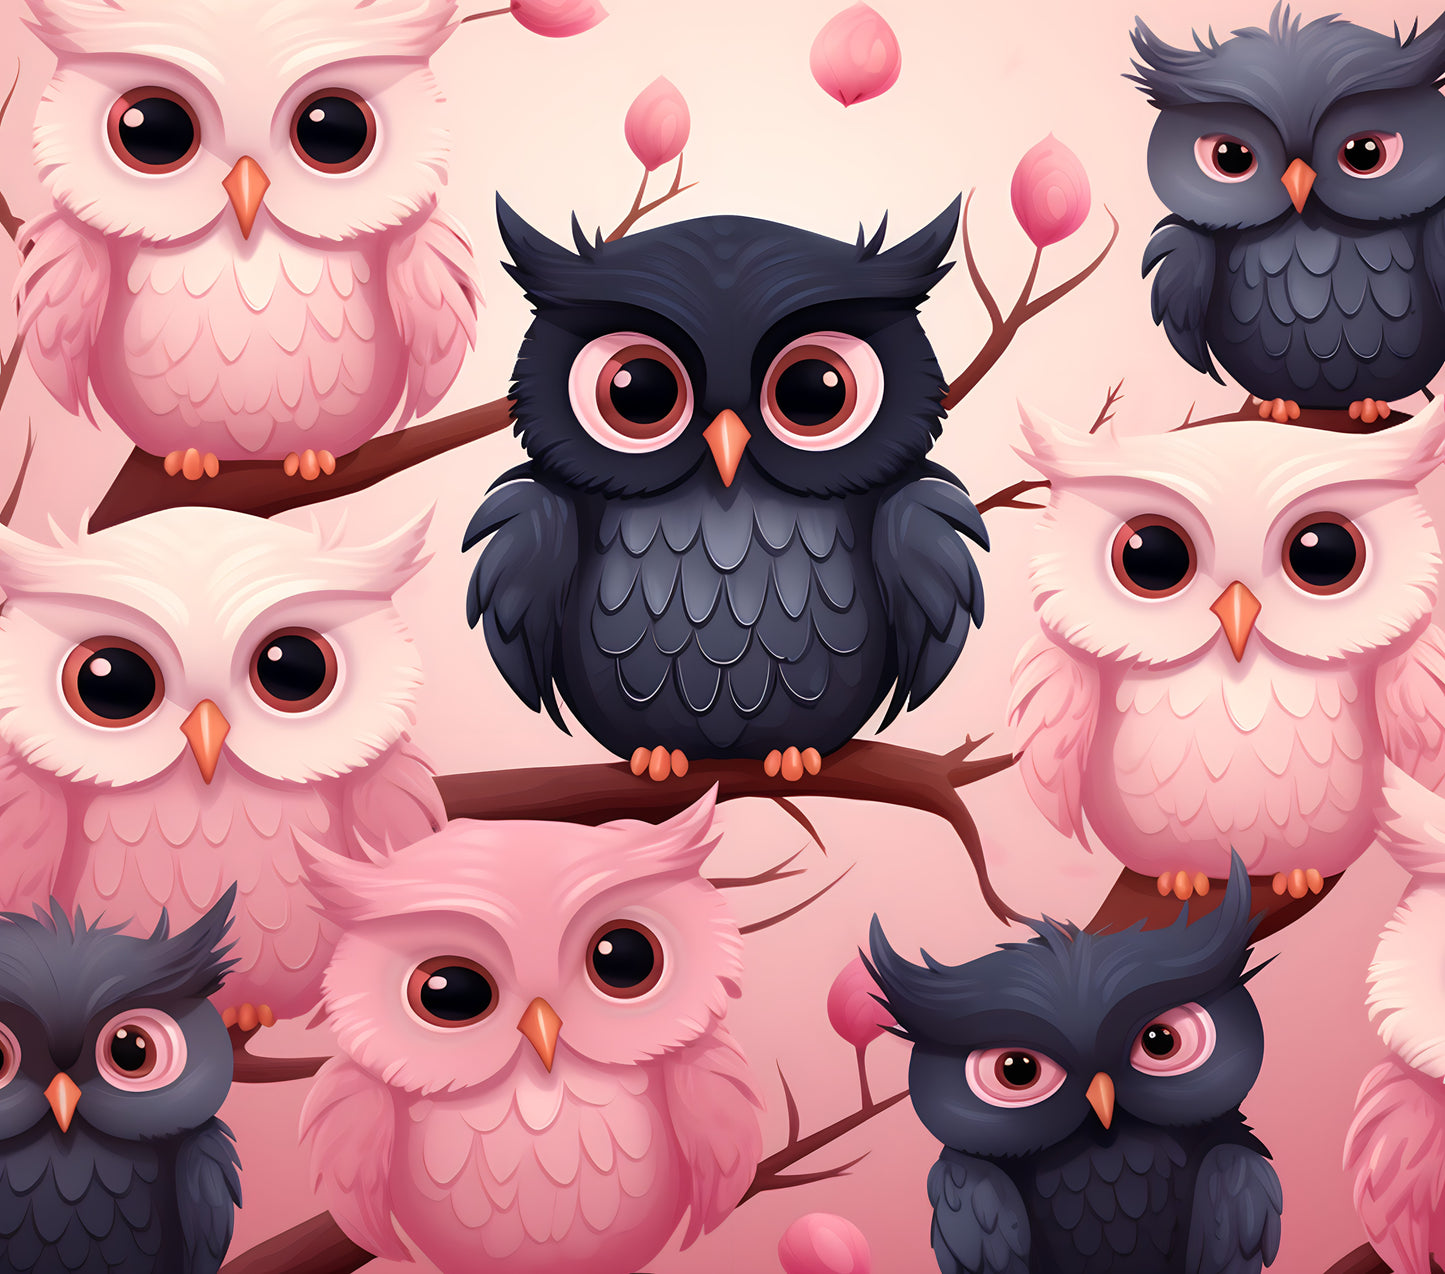 TW2133 pink and black owls